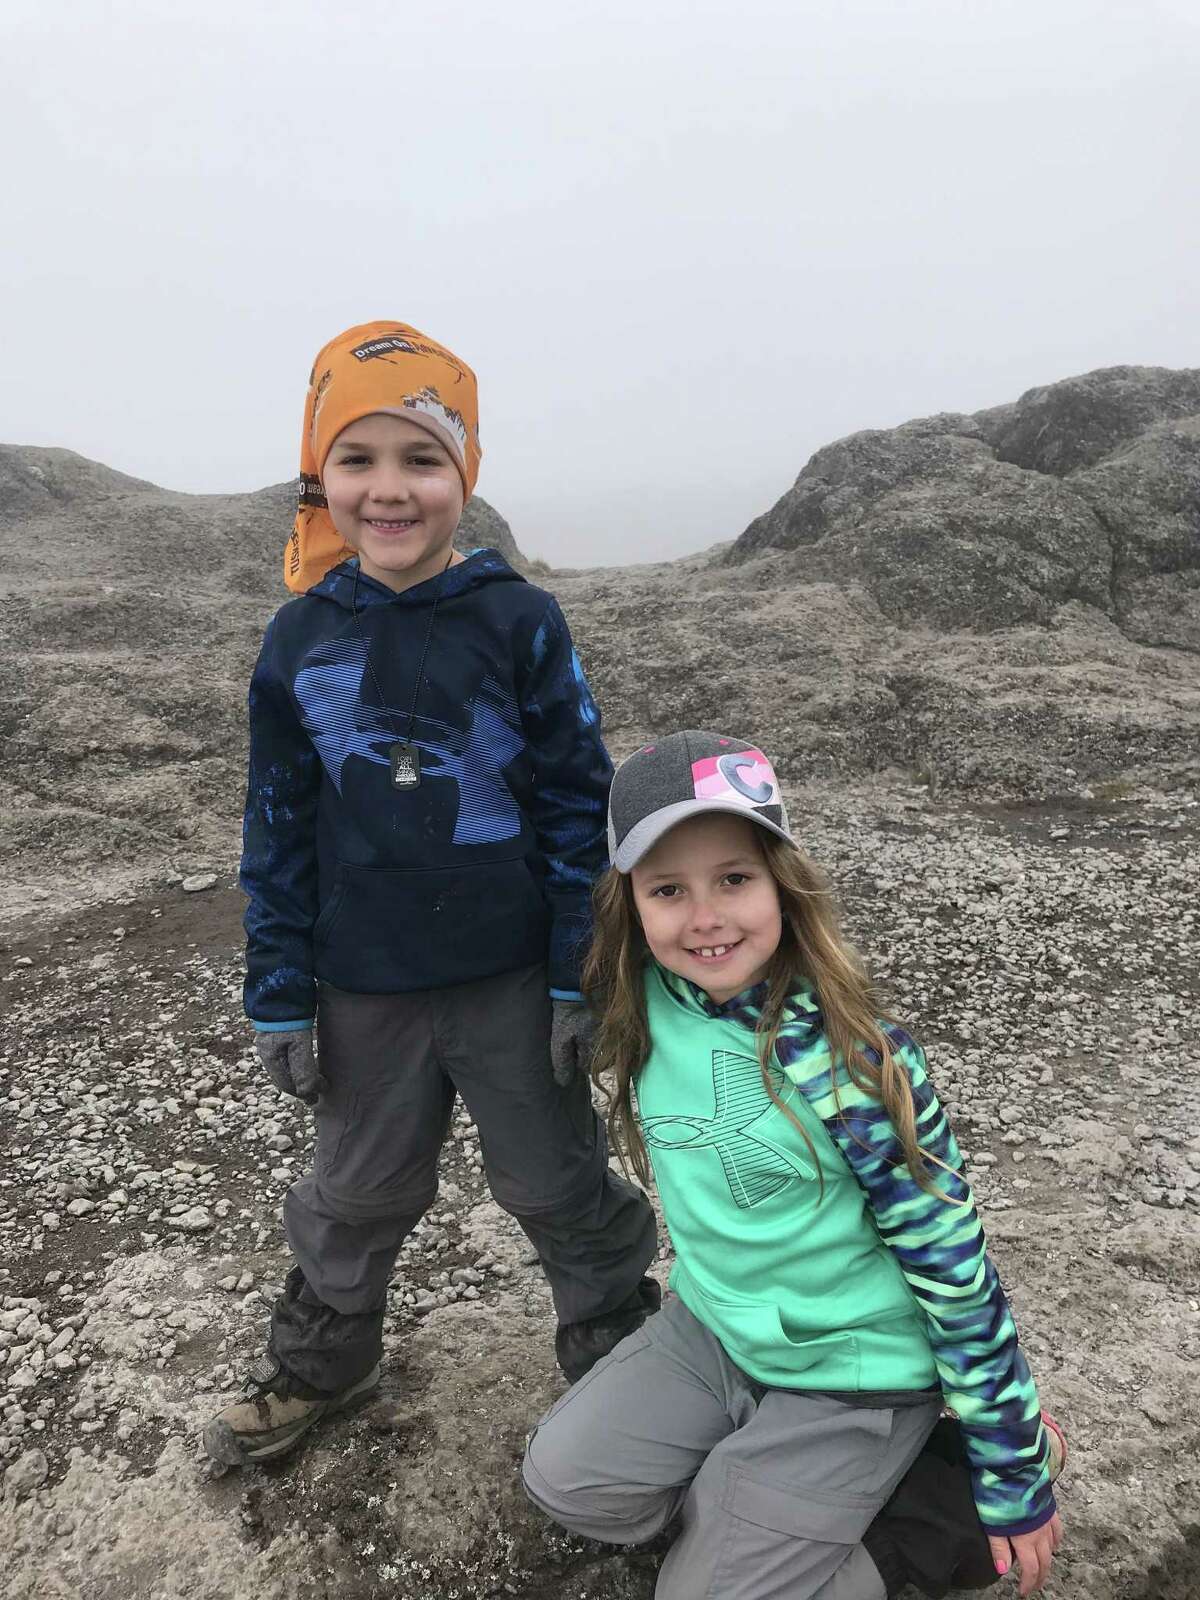 Joel and Charli Redmond say they were thrilled to reach the summit on Mount Kilimanjaro with their parents. “I was so happy because I wasn’t climbing uphill anymore,” Joel says. Charli’s response: “Yay! We made it.”